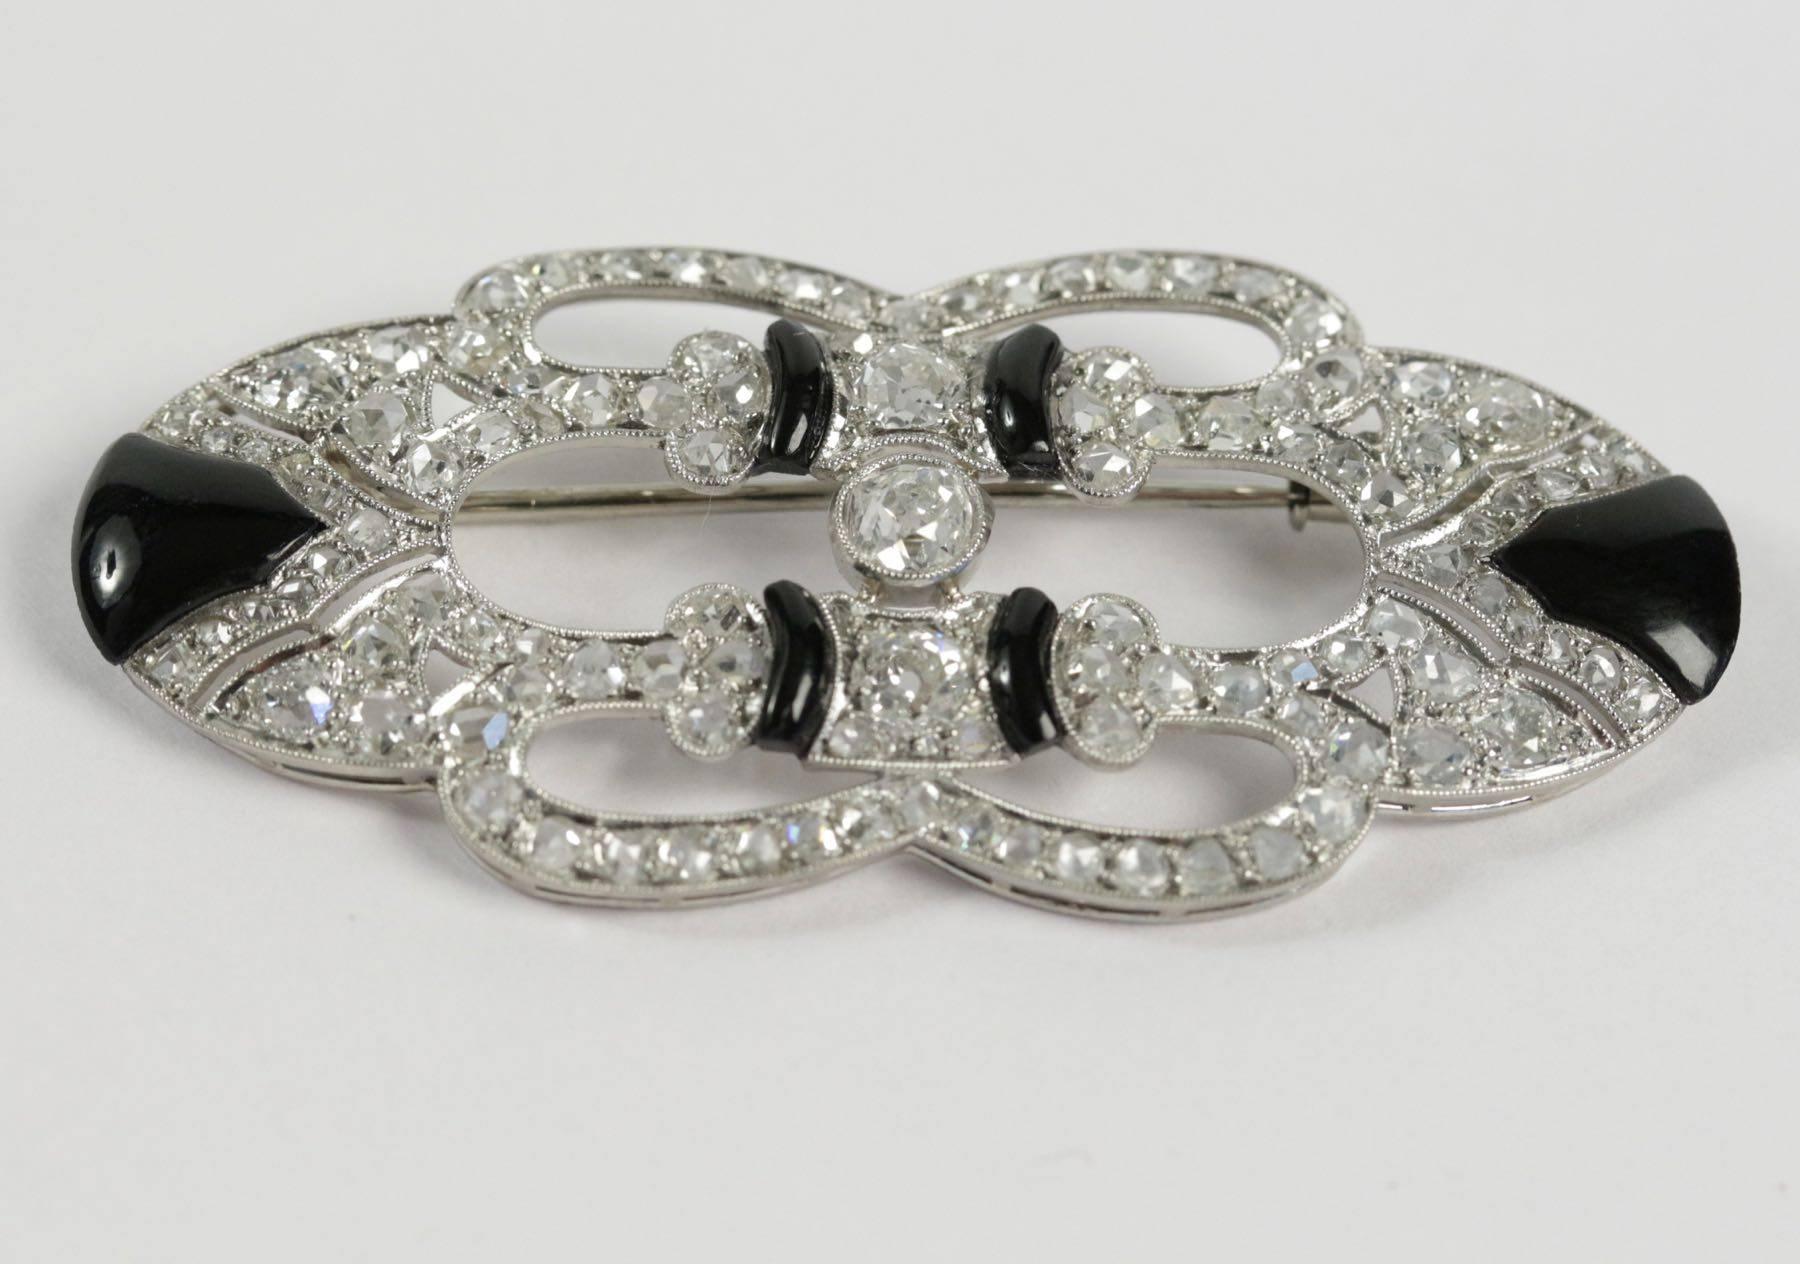 Art Deco platinum and gold brooch set with onyx and brillant cut diamonds (total weight estimated at approximately 4 ct). French work. Circa 1920.